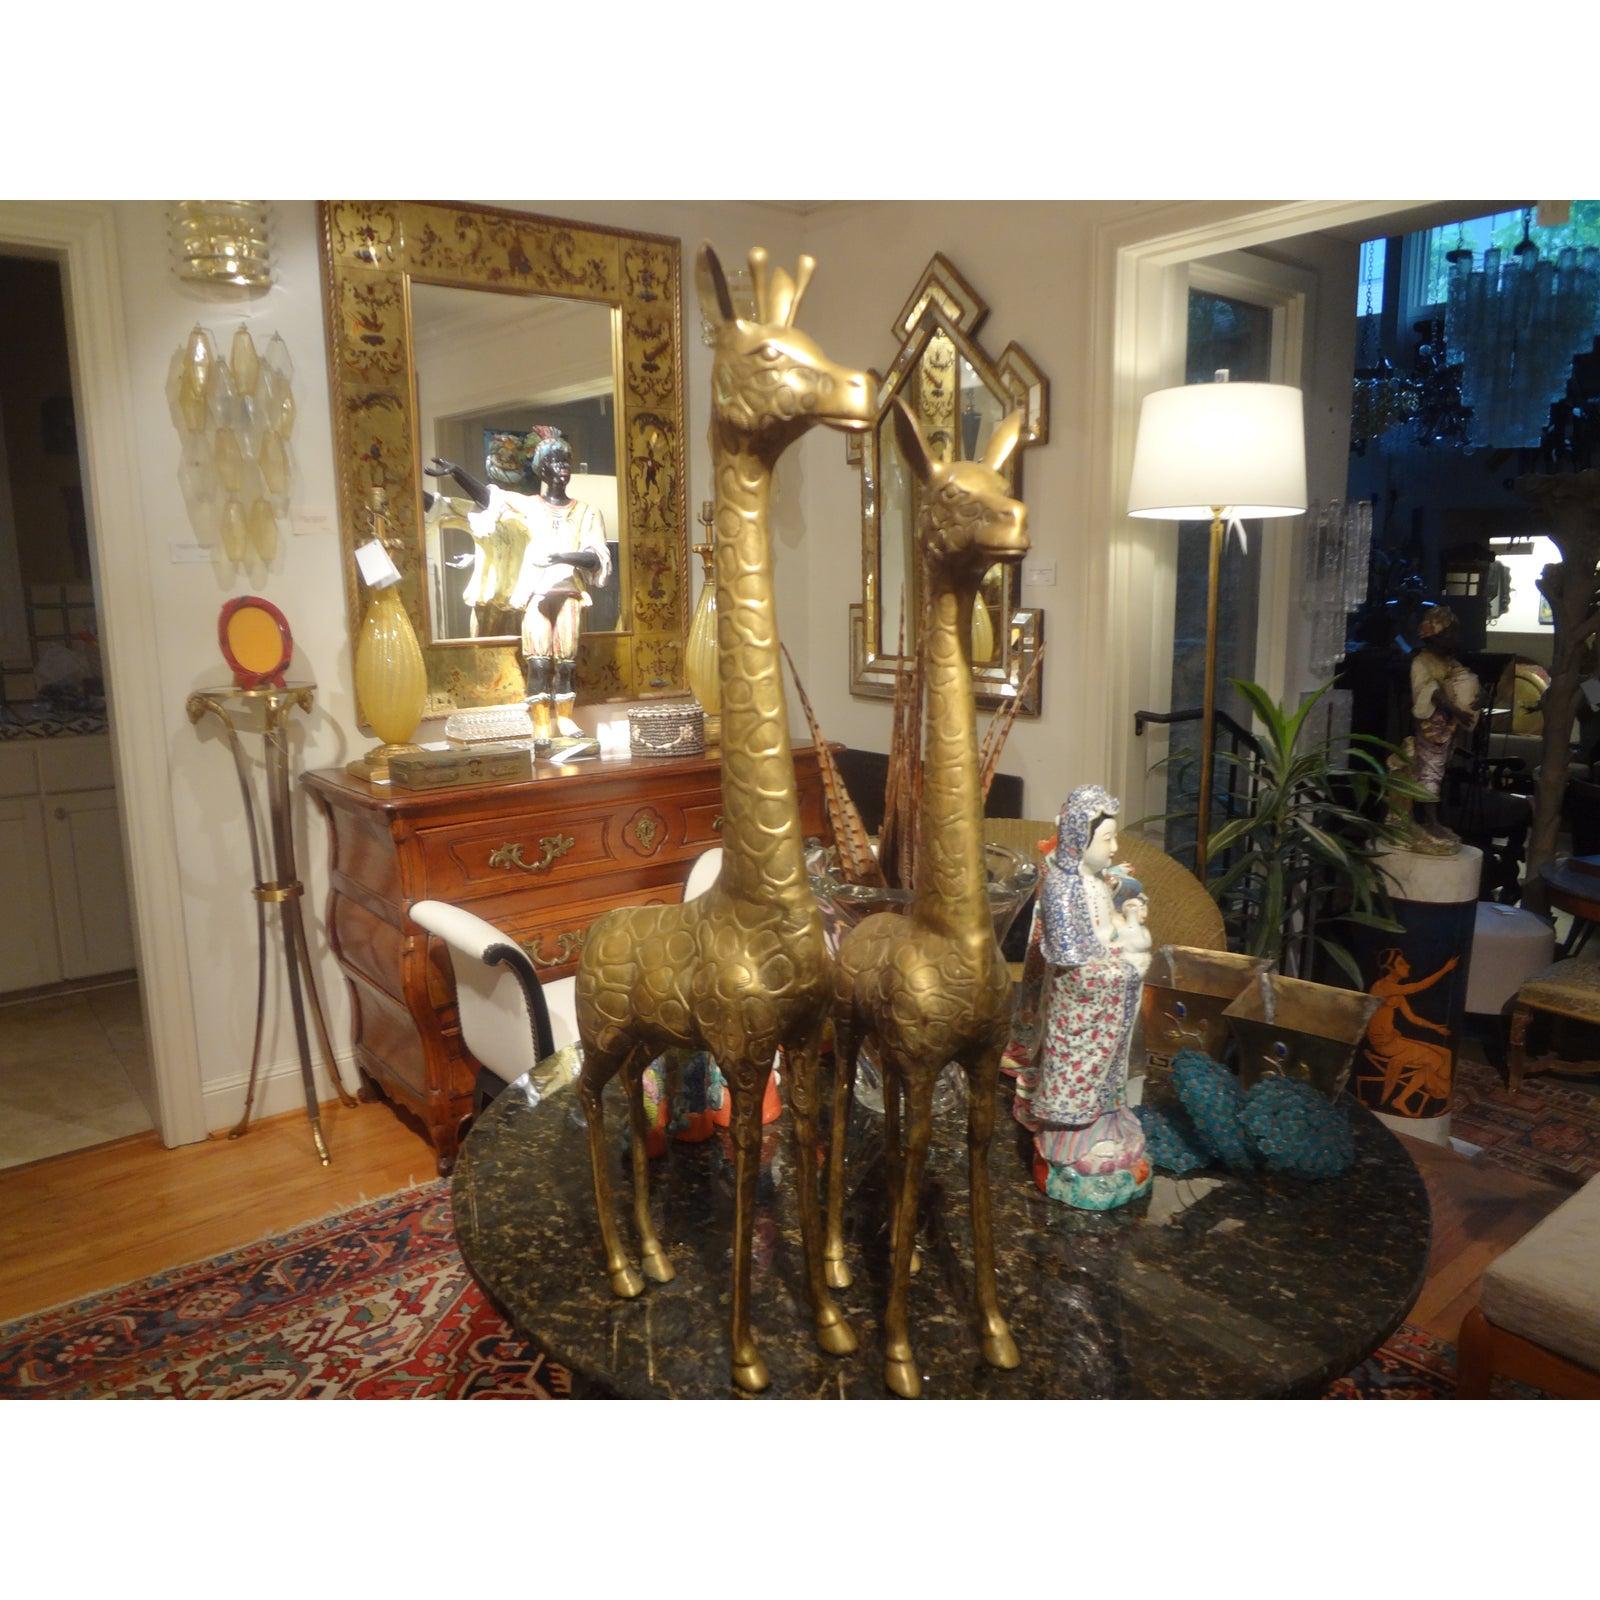 Pair of Hollywood Regency brass giraffes.
Great tall pair of midcentury brass giraffe sculptures or figures, a male and a female.
This well detailed pair of Hollywood Regency giraffes, are freestanding.
Male dimensions: 30.25